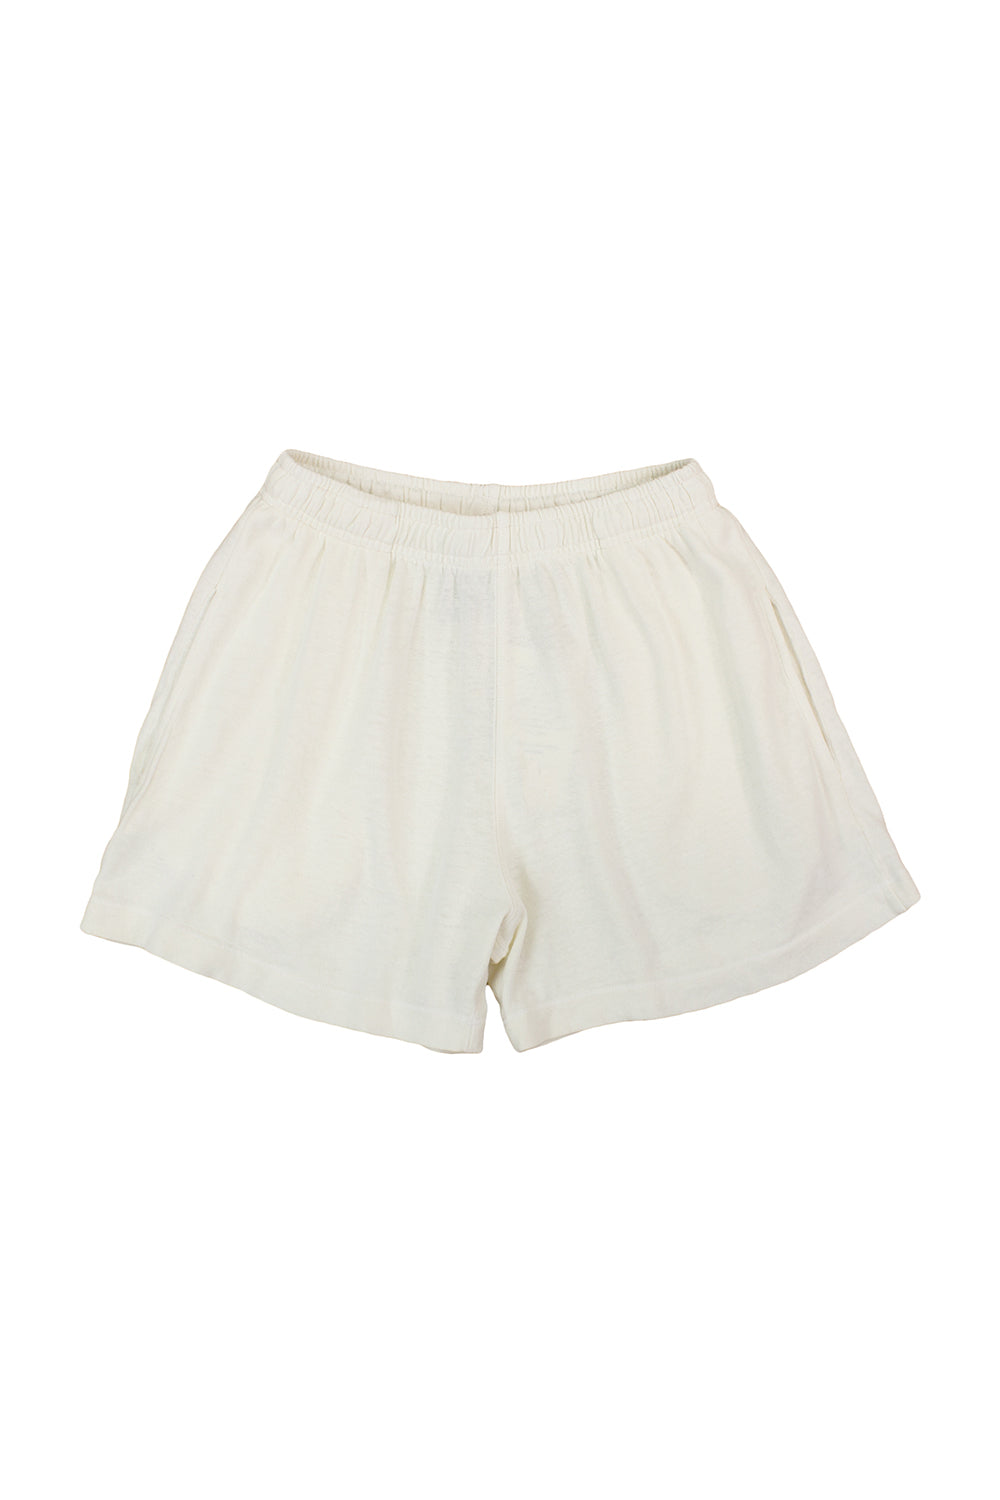 Sun Short | Jungmaven Hemp Clothing & Accessories / Color: Washed White